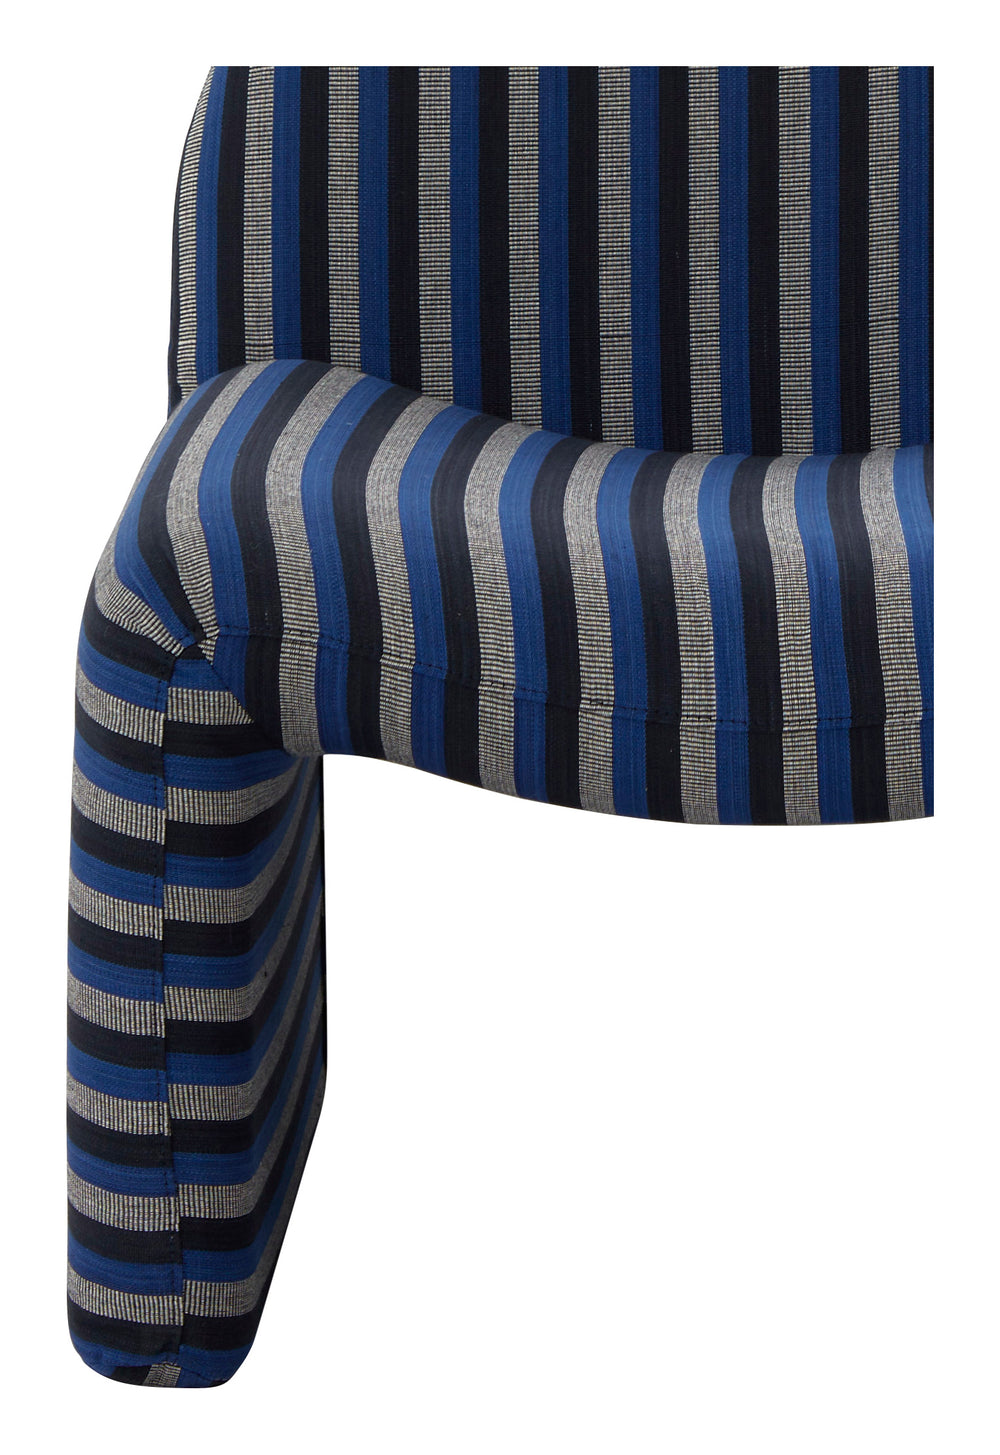 Vintage Striped Alky Chair